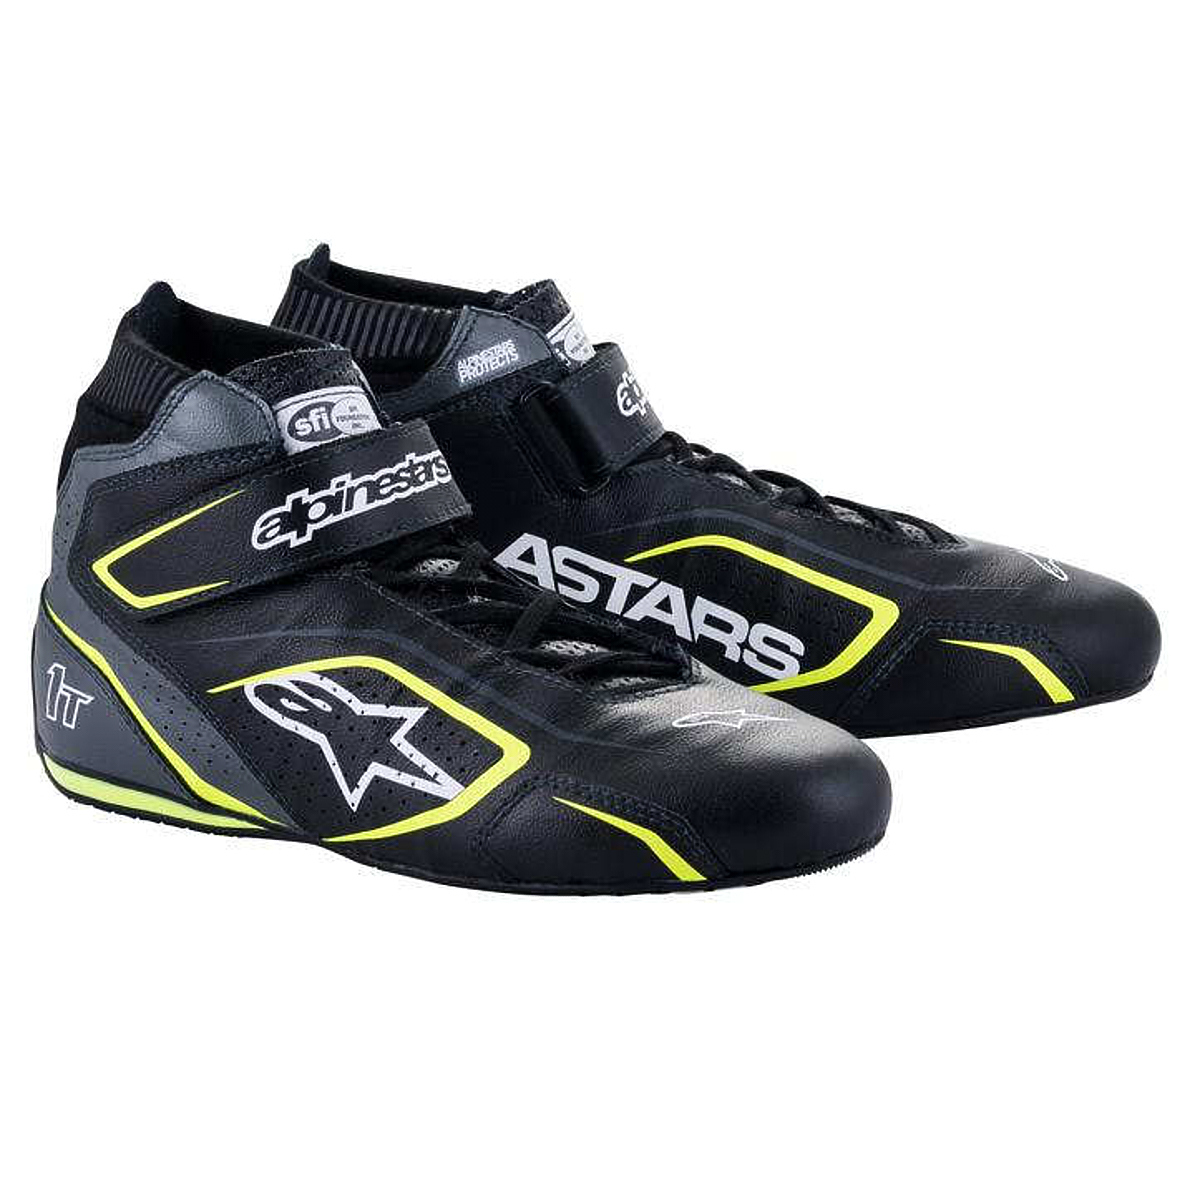 Alpinestars 2710122-1055-105 Driving Shoe, Tech 1-T V3, Mid-Top, SFI 3.3, Leather Outer, Nomex Inner, Black / Fluorescent Yellow, Size 10.5, Pair